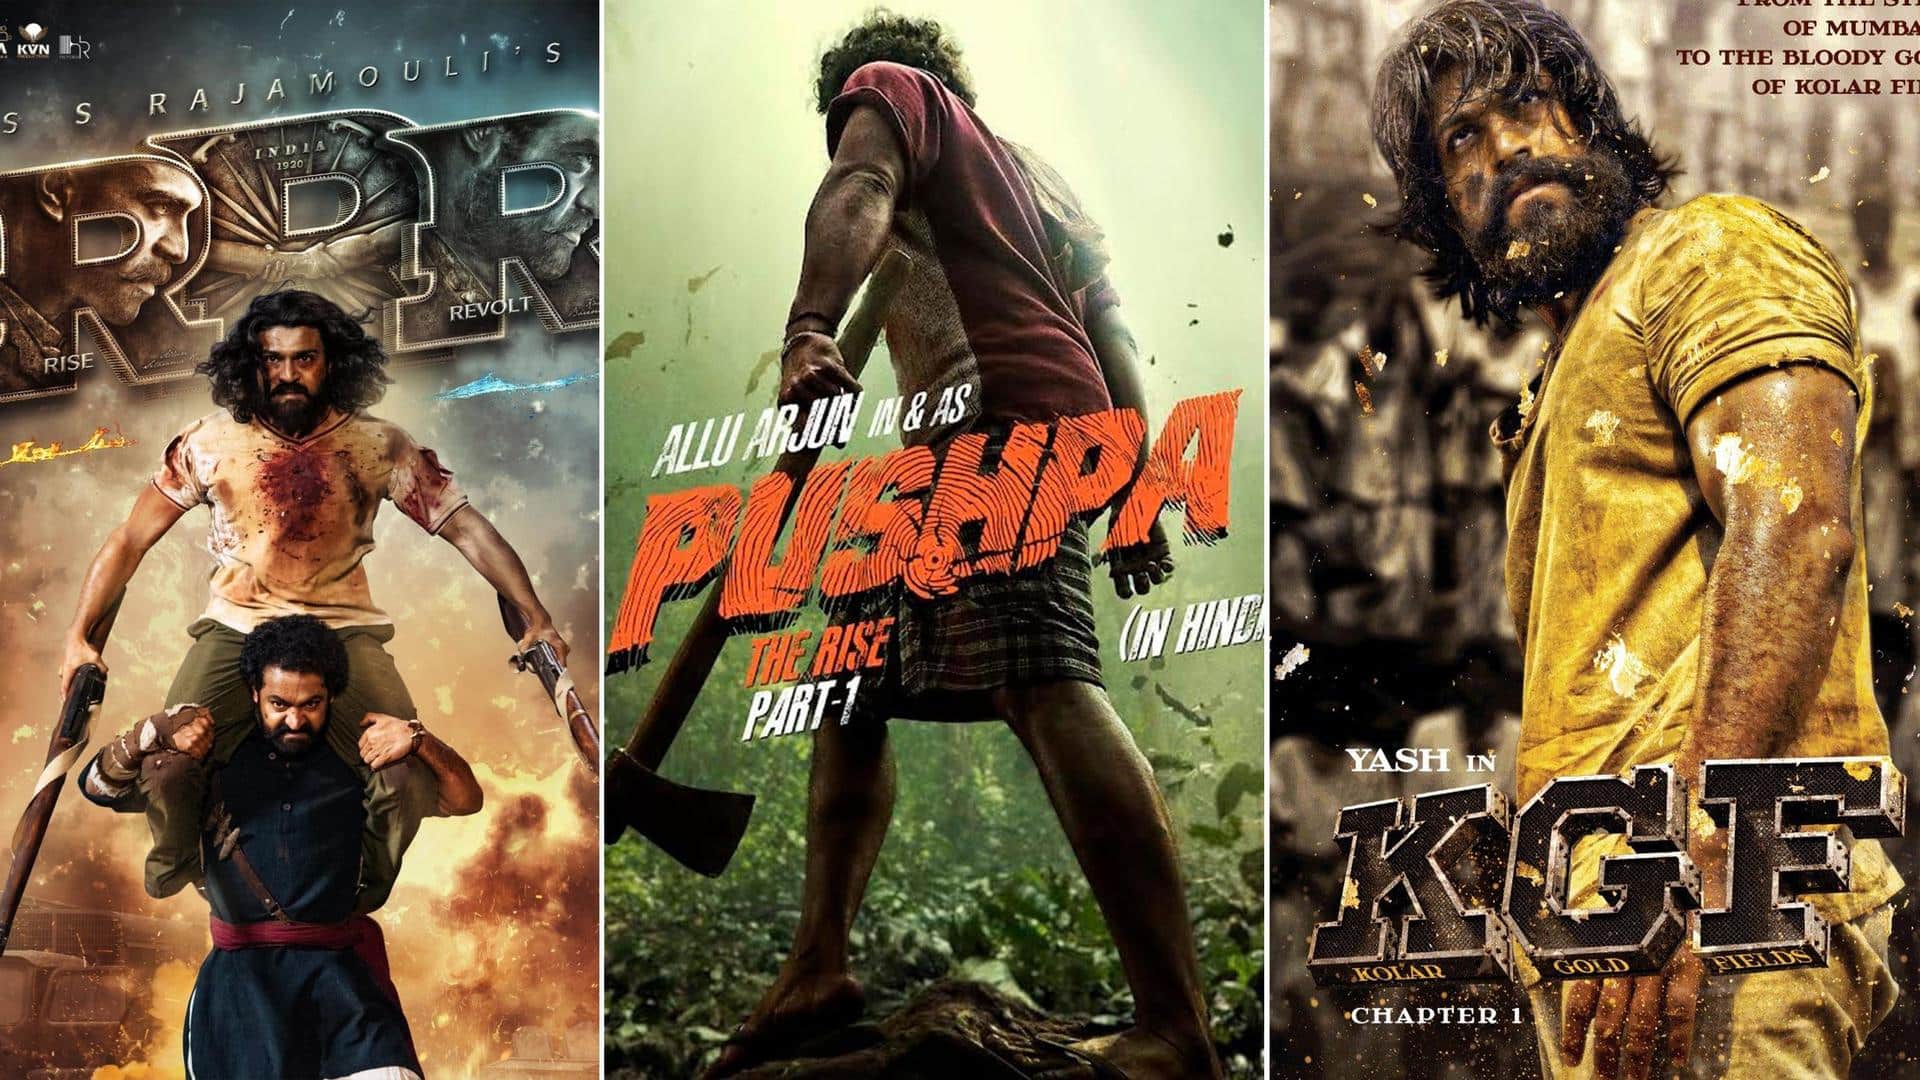 Major reasons why South Indian films are outperforming Bollywood